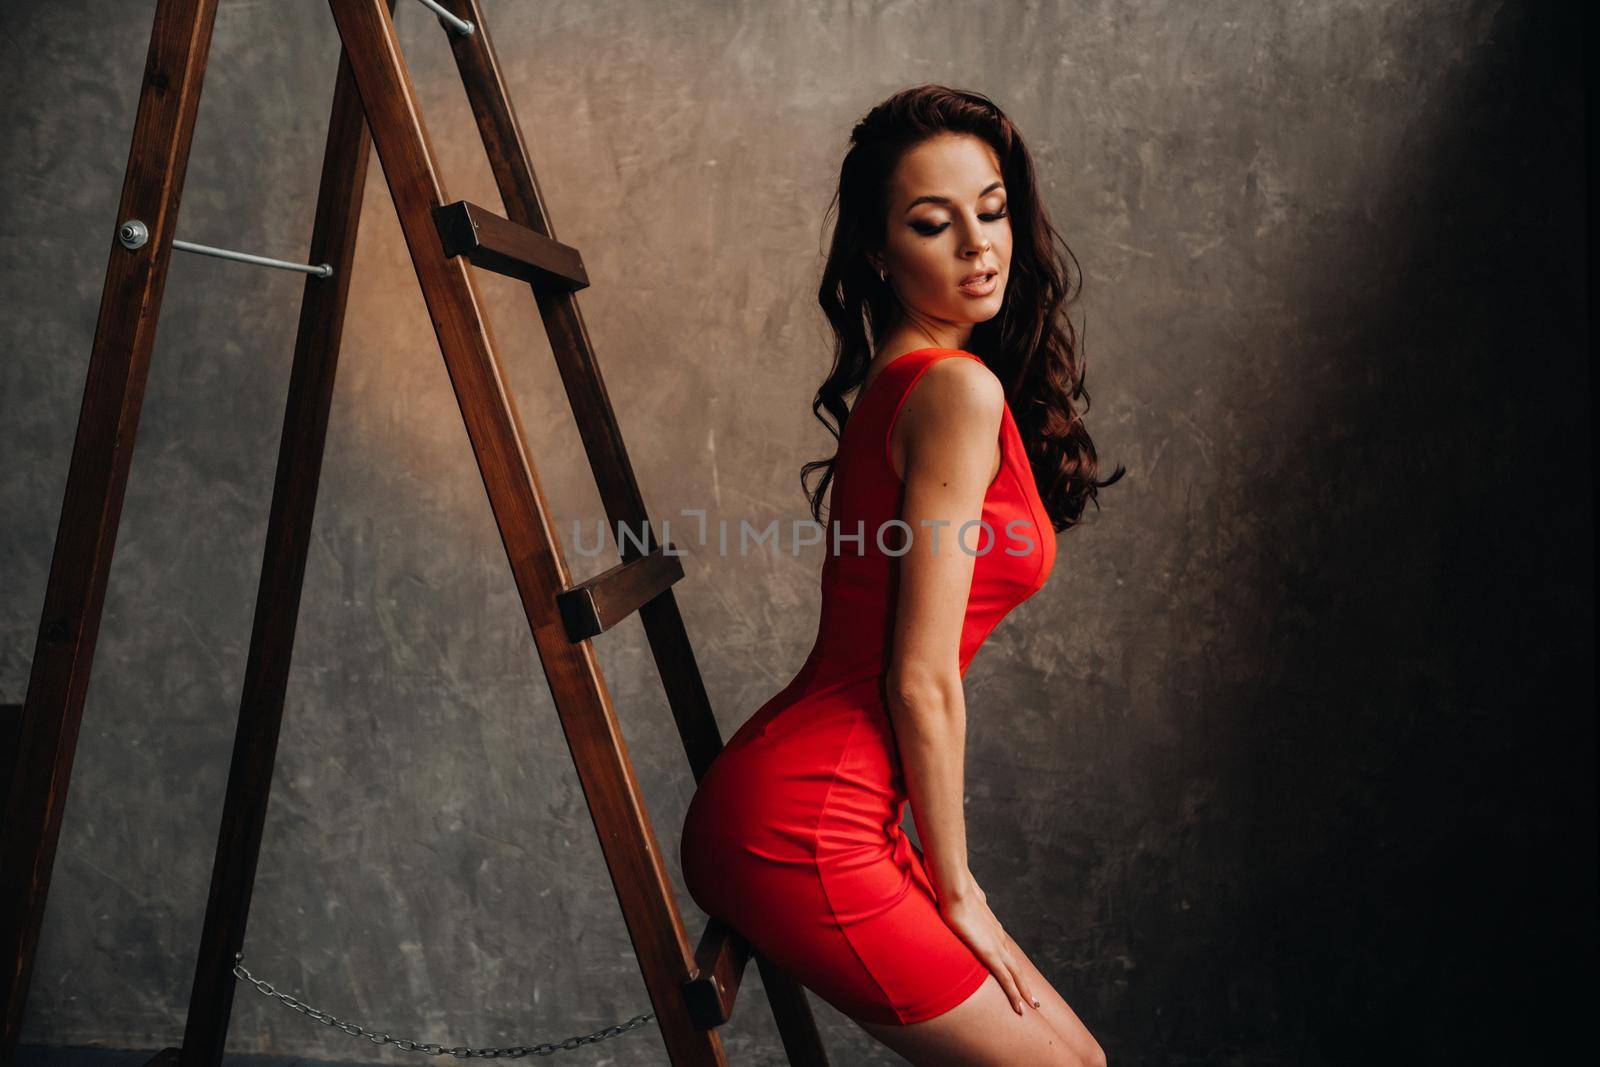 a brunette with long hair in a red dress poses in the studio near the stairs.